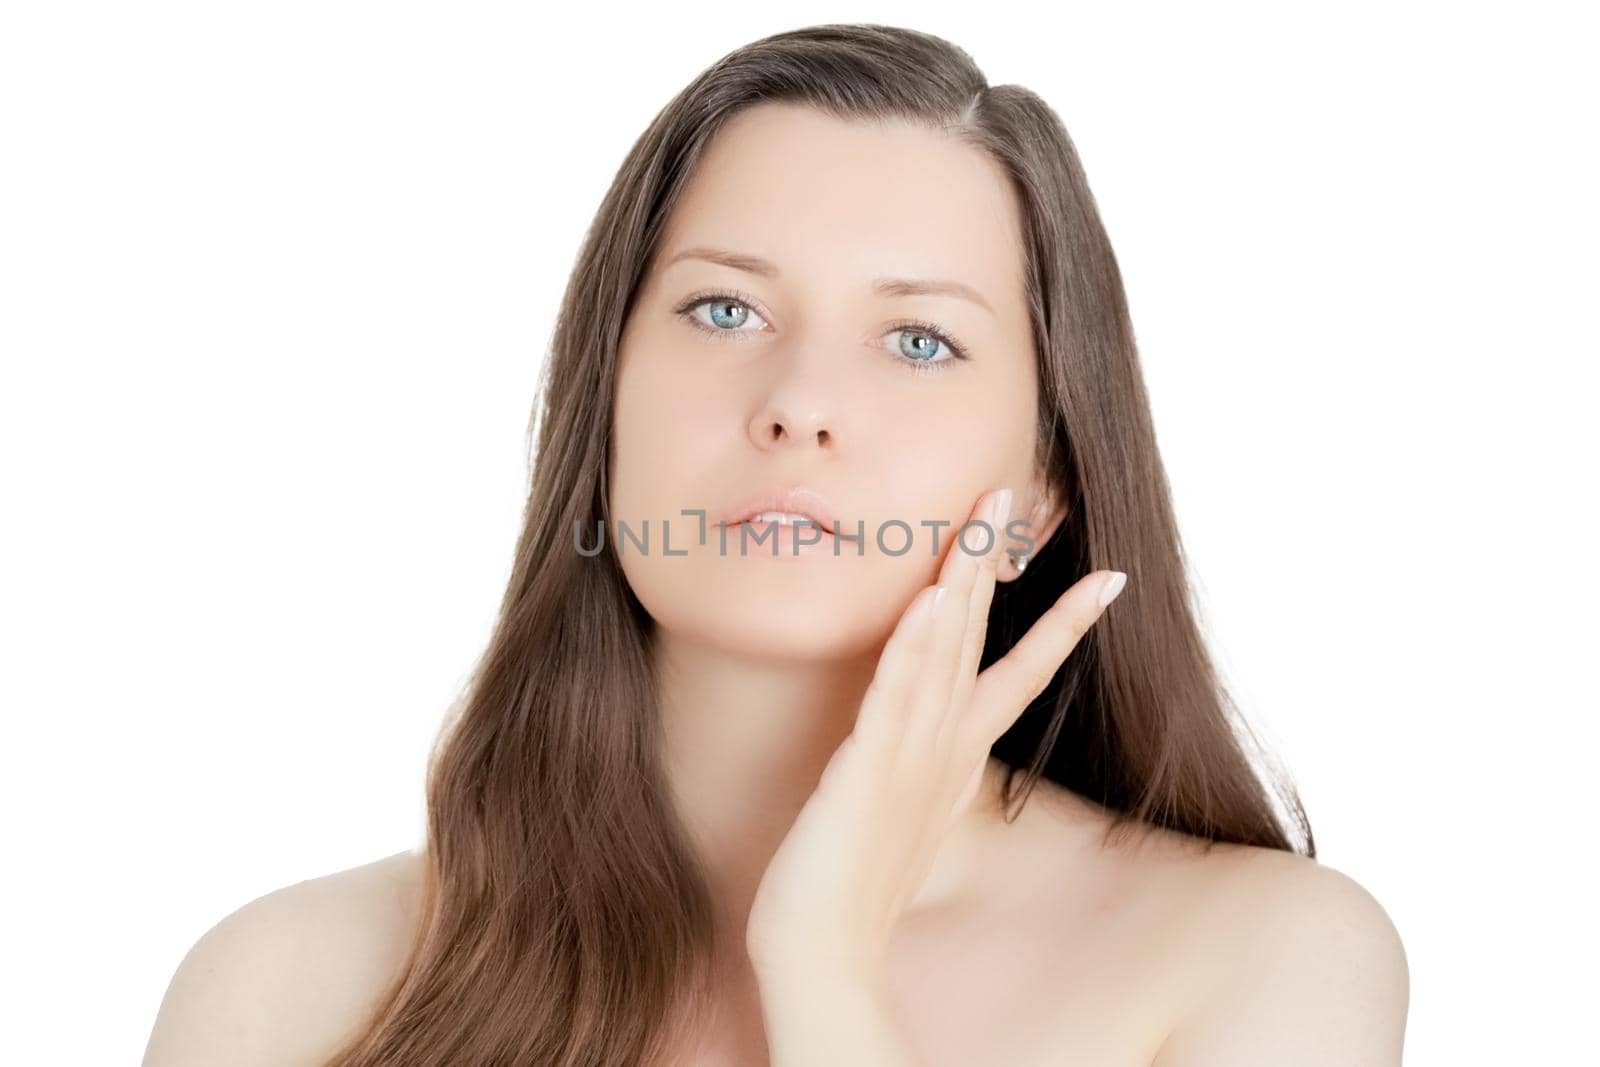 Beautiful woman with natural look, perfect skin as make-up and wellness concept, isolated on white background. Face portrait of young female model for skincare cosmetics and luxury beauty ad design.